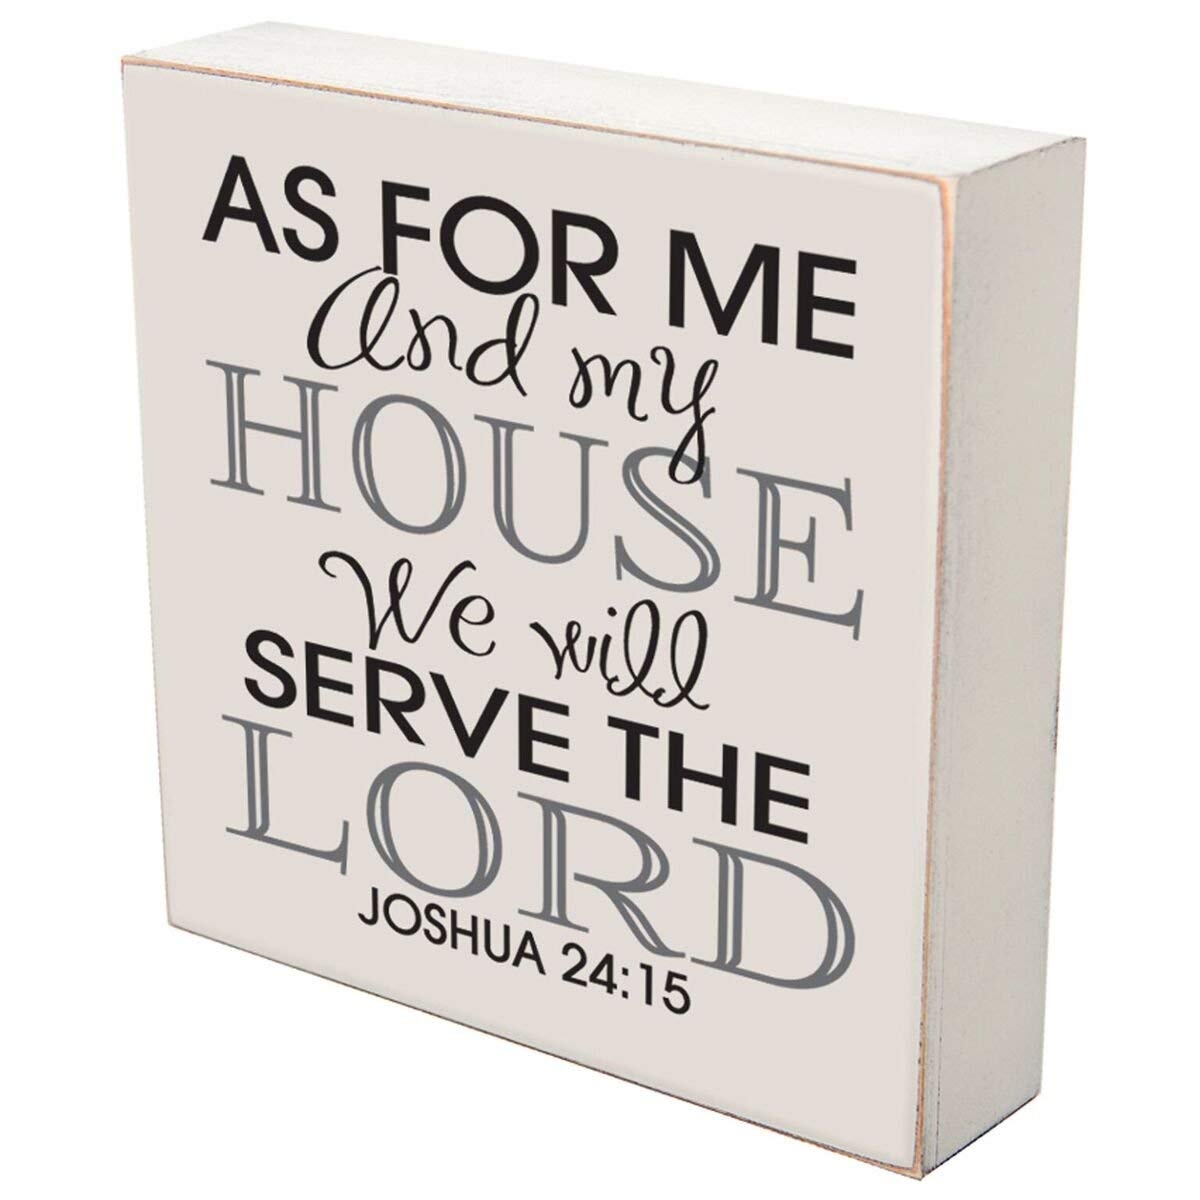 Wedding Anniversary Shadow Box Gift - We Will Serve The Lord